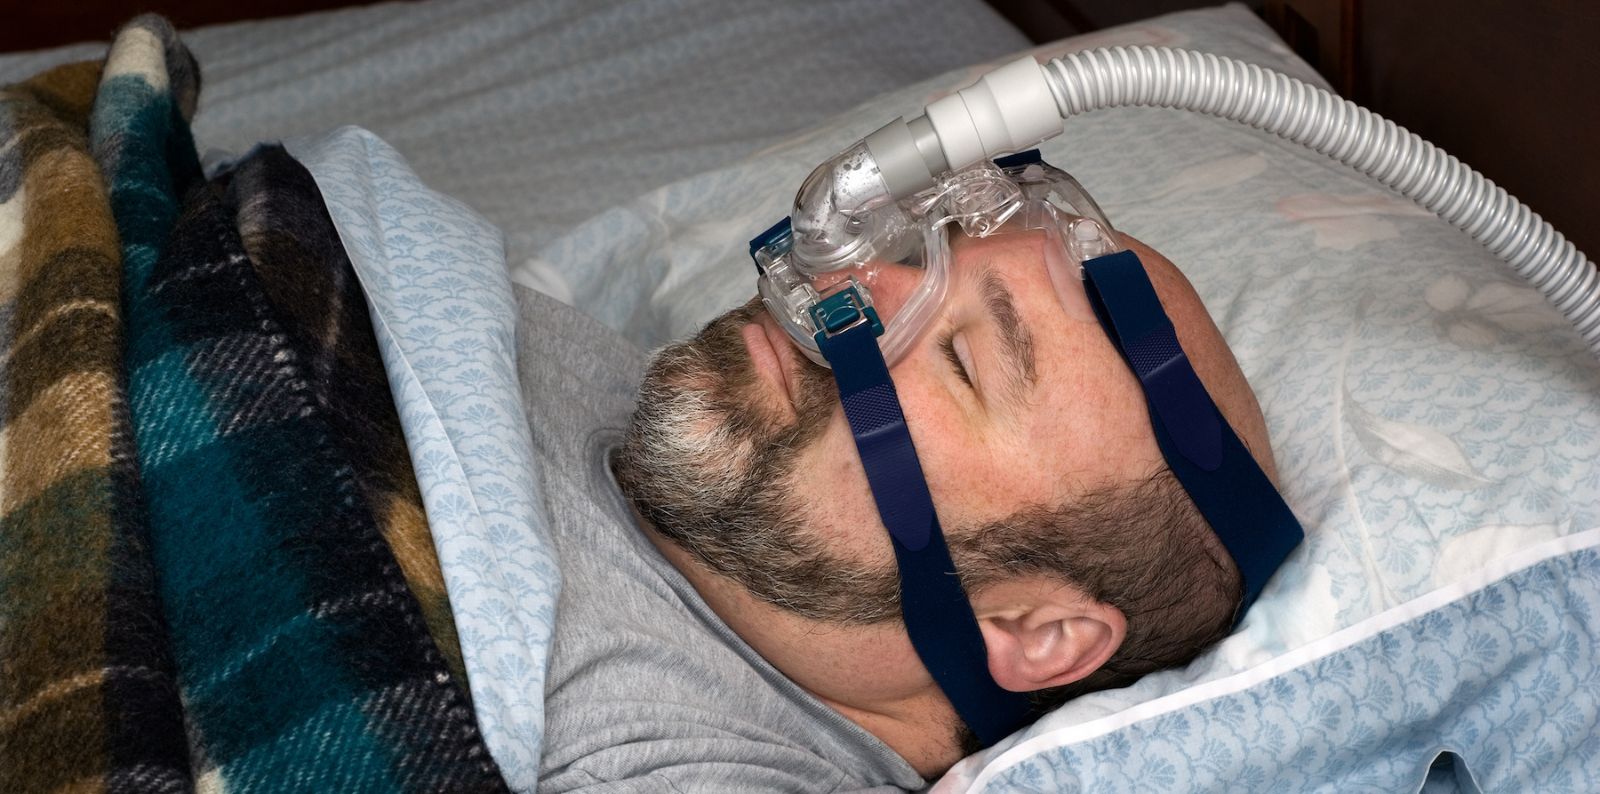 Philips CPAP Lawsuit: What Harmed Veterans Need To Know About Their Rights